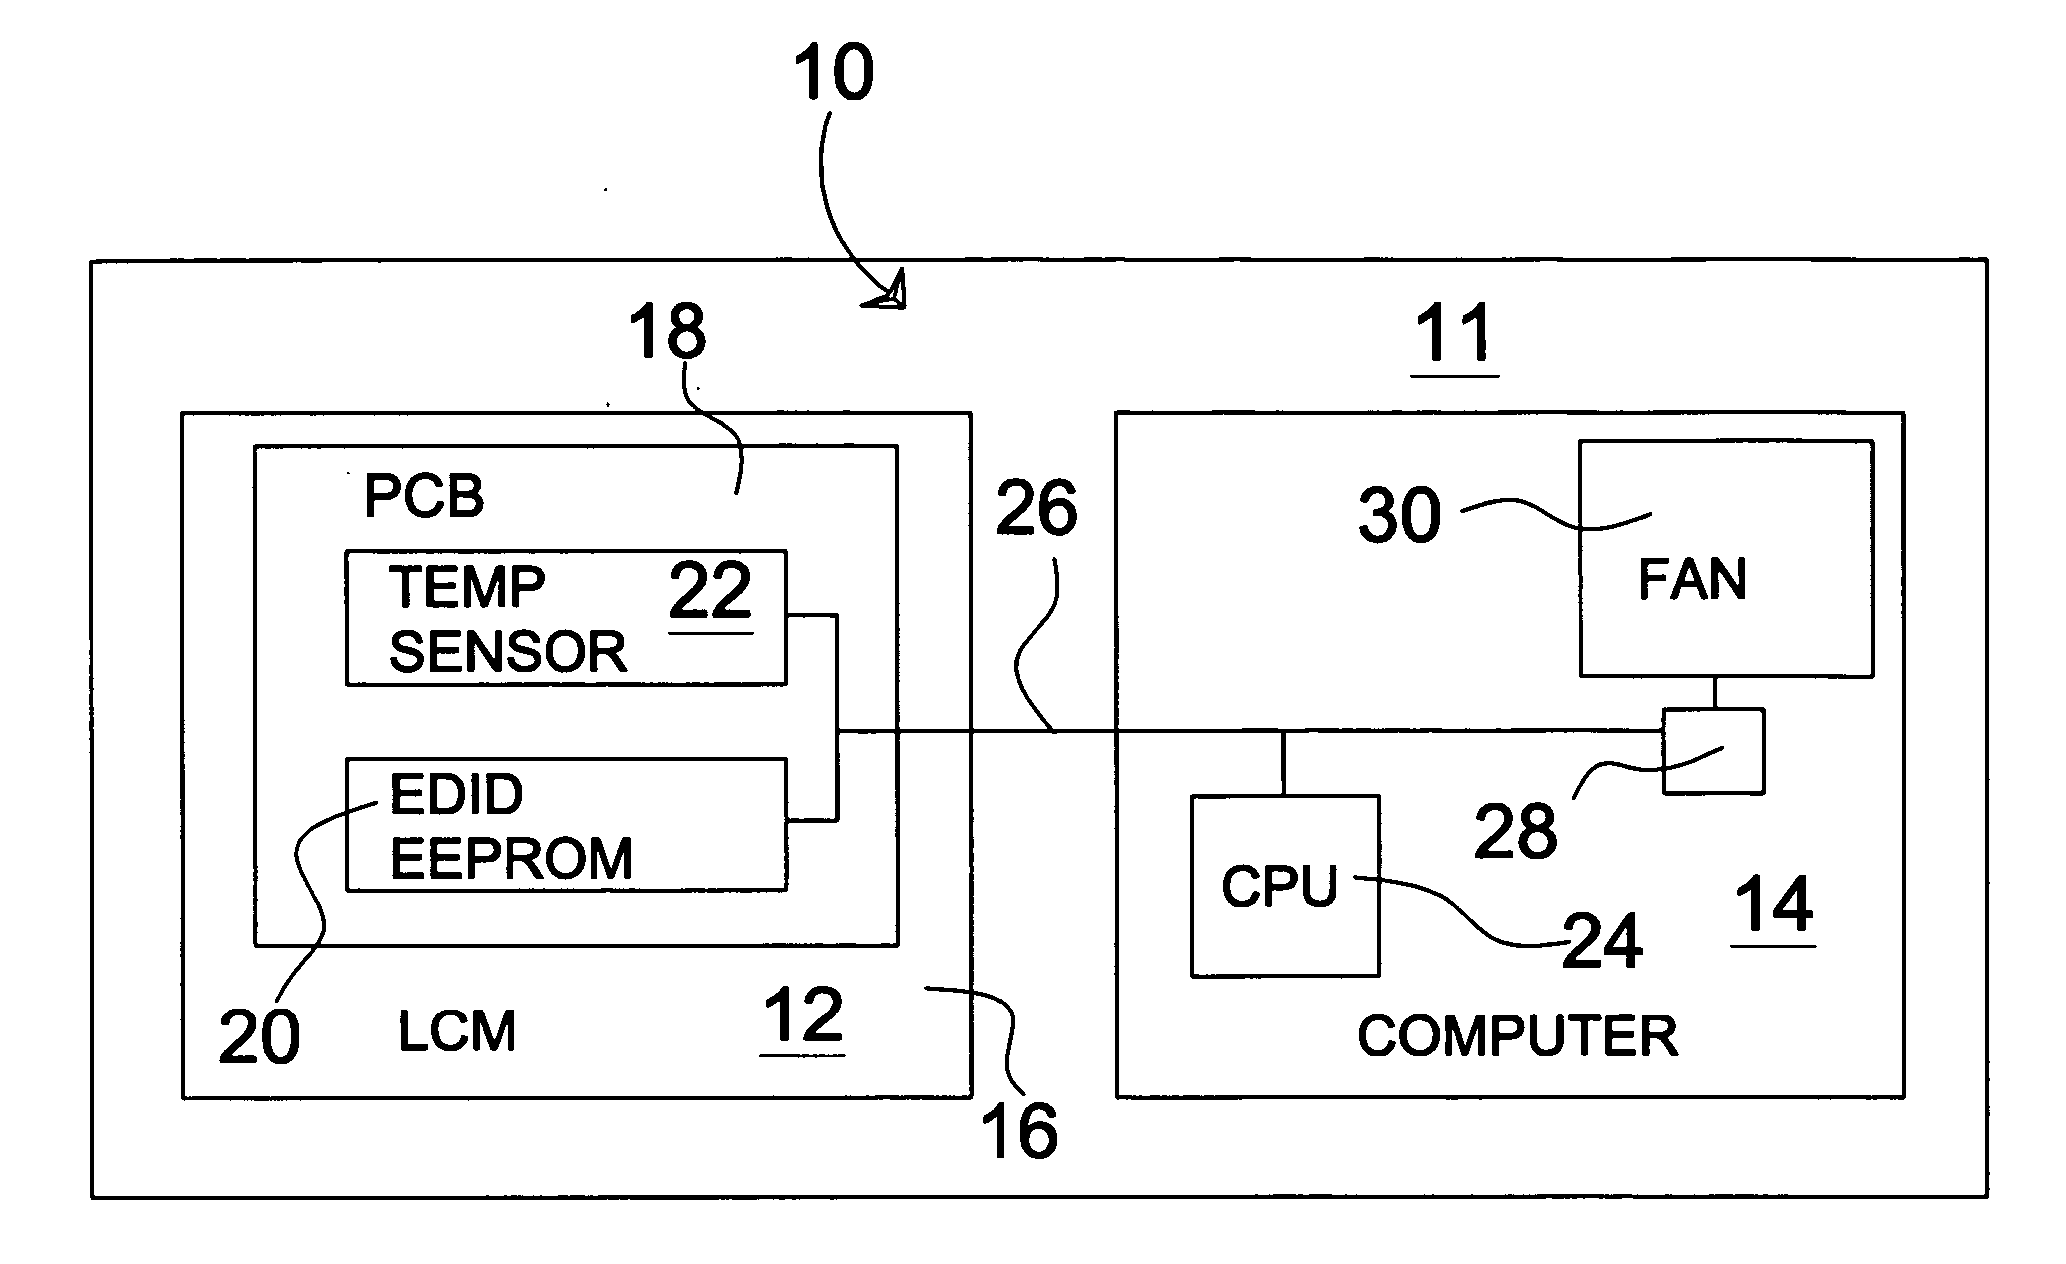 LCD module with thermal sensor integrated and its implementation